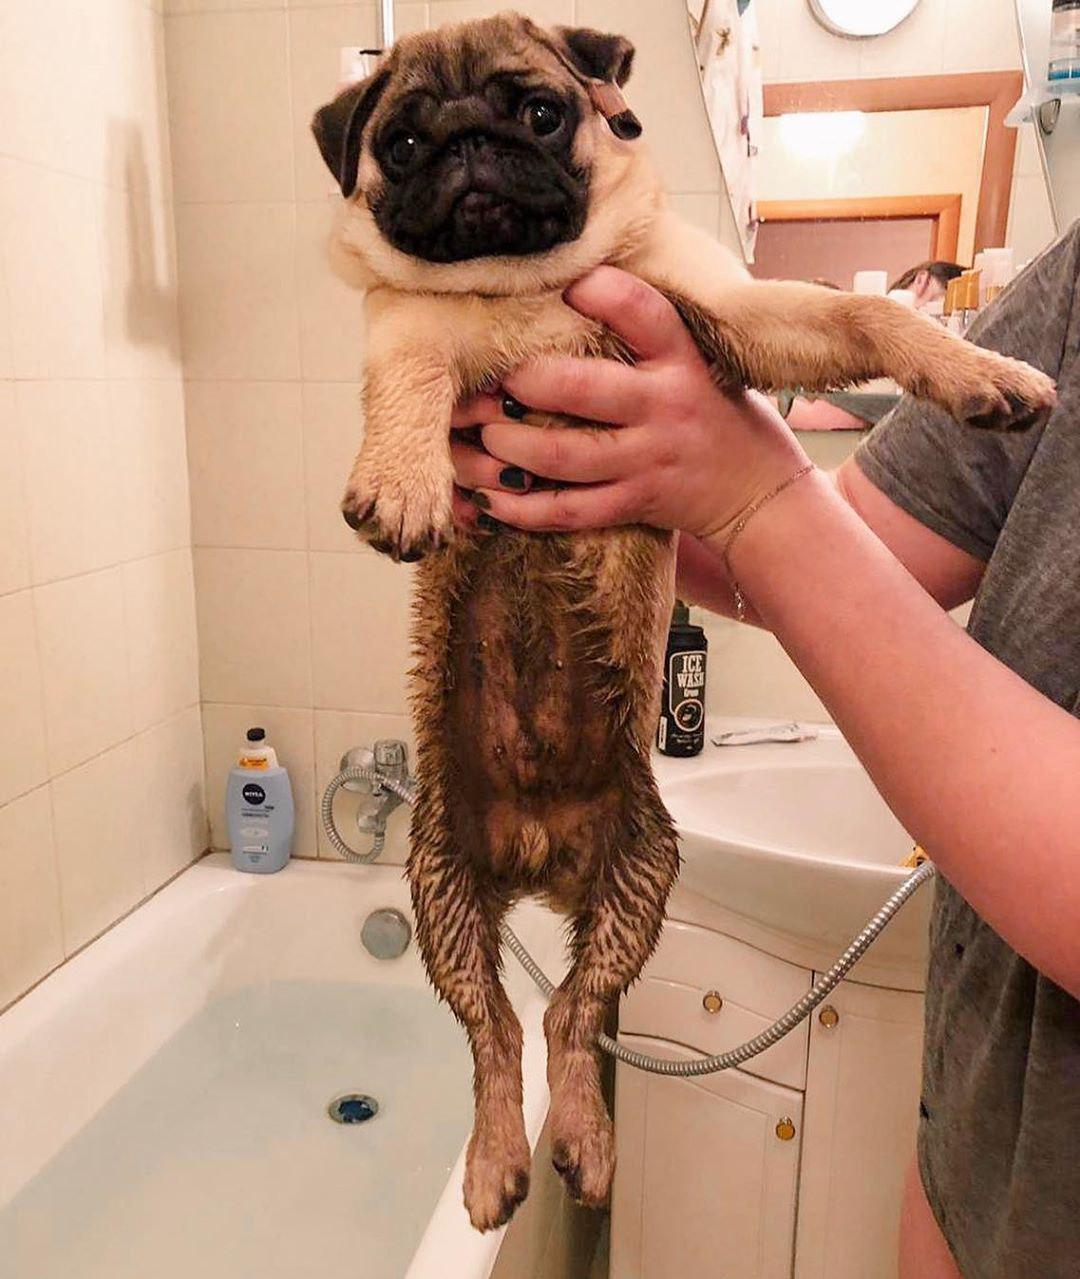 A man holding a Pug with dirt in its tummy